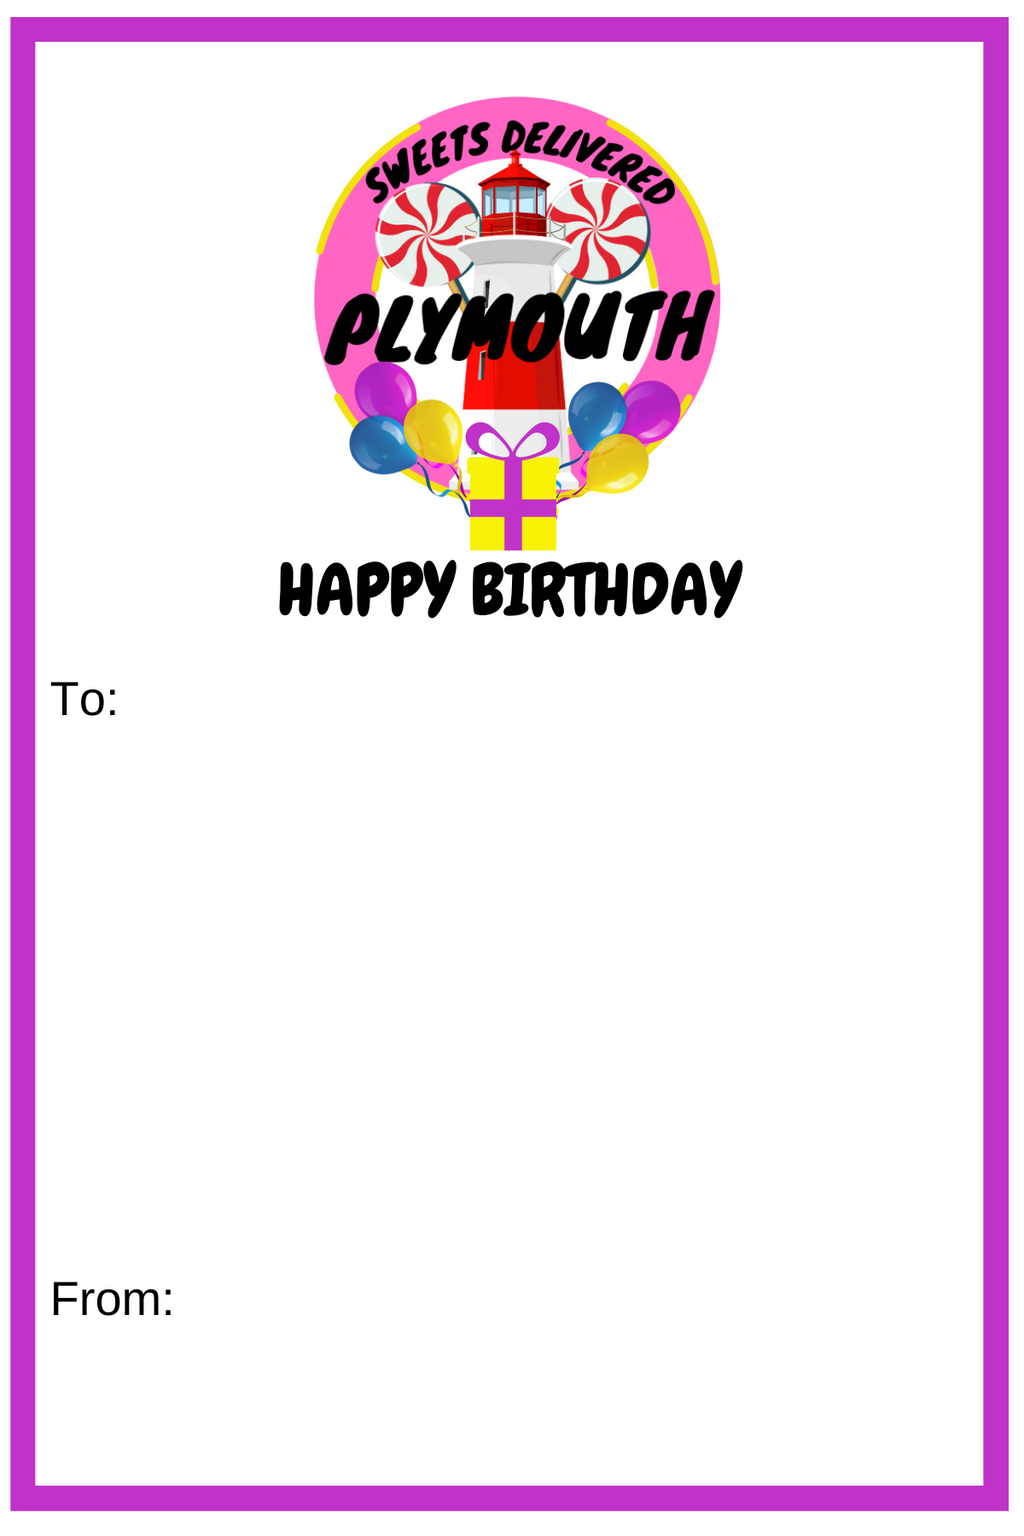 HAPPY BIRTHDAY Sticker and A6 Message Card Combo (Add-On)